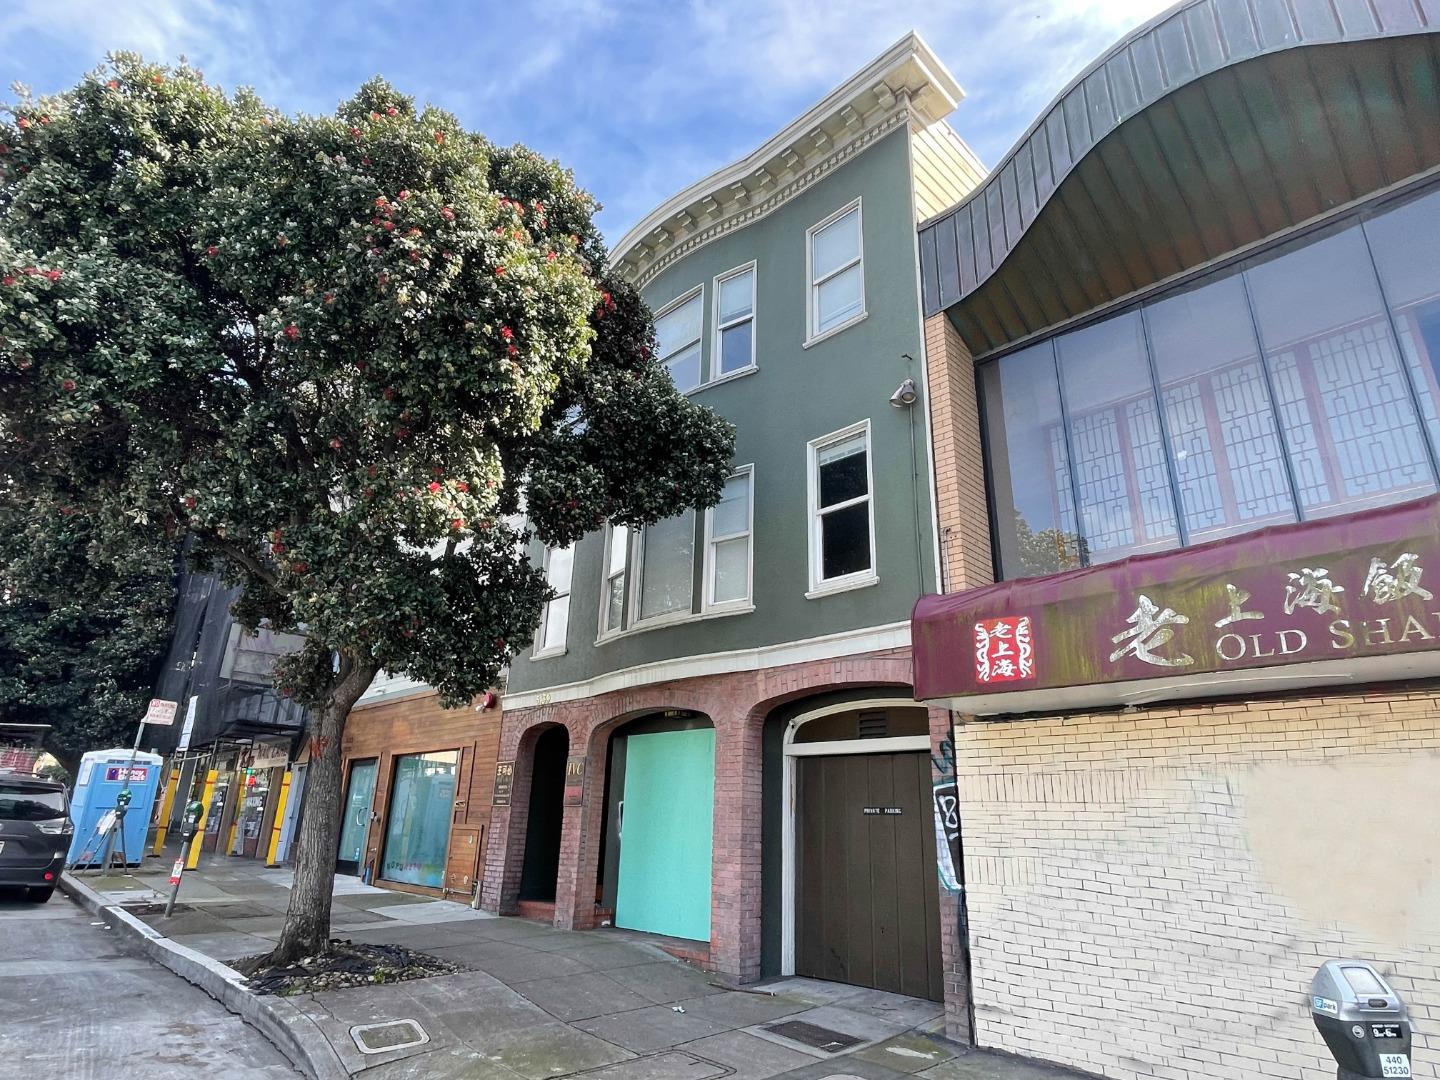 Photo of 5139-5141 Geary Blvd in San Francisco, CA